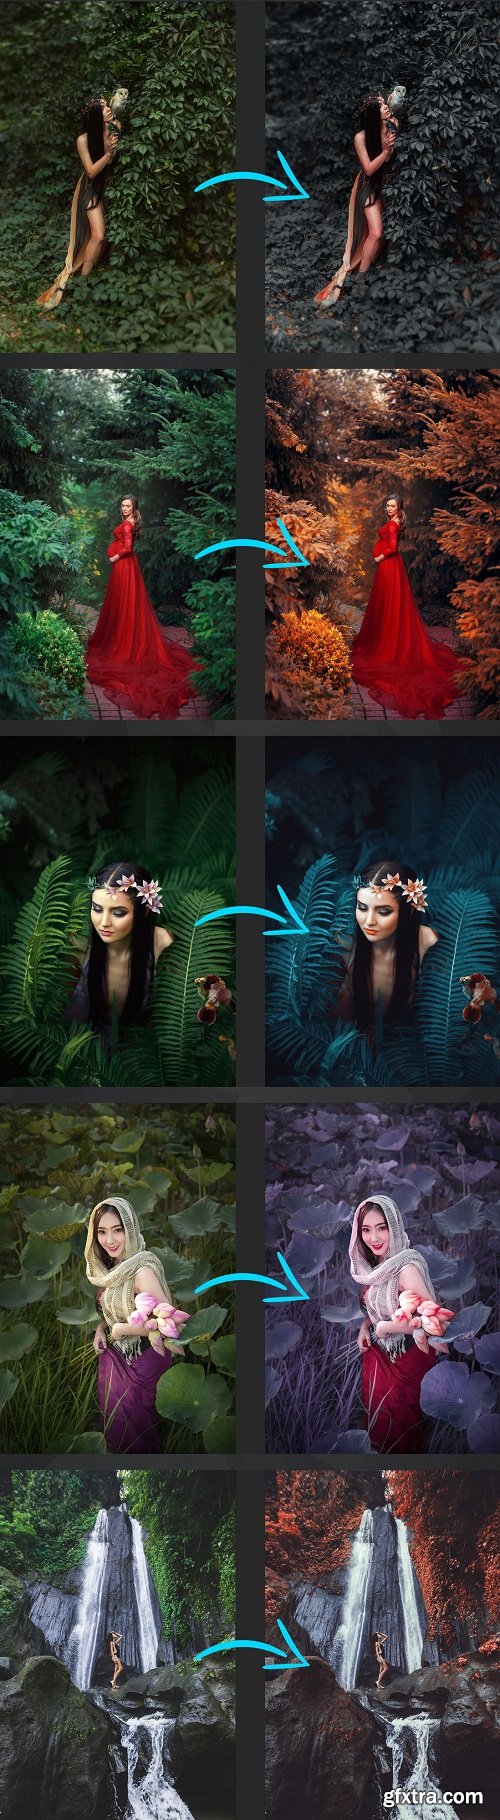 Artcolors.photoshop-professional - ART Coloring Actions by Alexey Kuzmichev